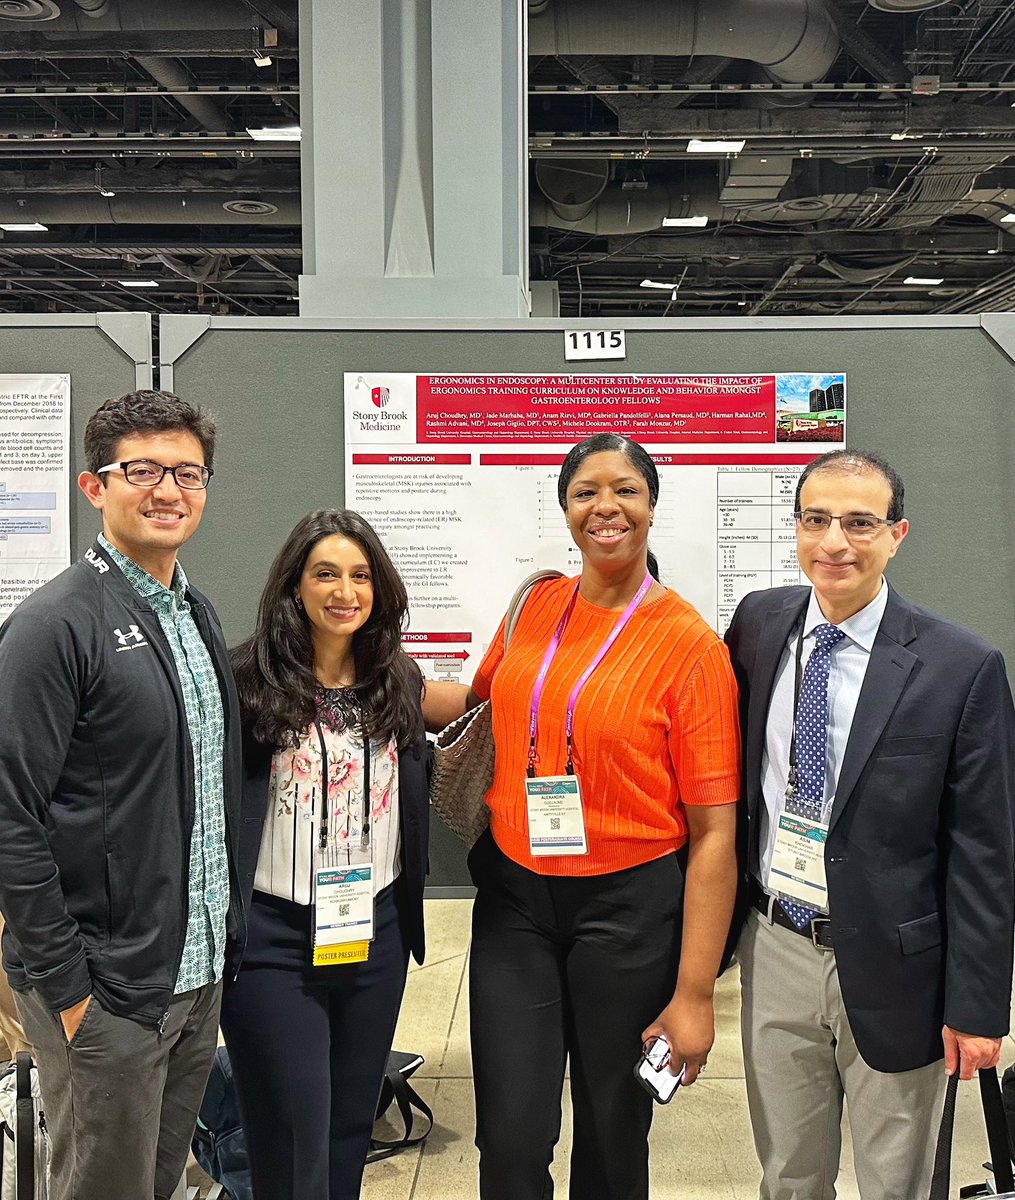 Very thankful to my mentor @FarahMonzurMD and @StonyBrookGI for their continued support in my training and education. Rounding out some final poster presentations as a Stony Brook GI fellow 🥹🥹 @DDWMeeting #GItwitter #DDW2024